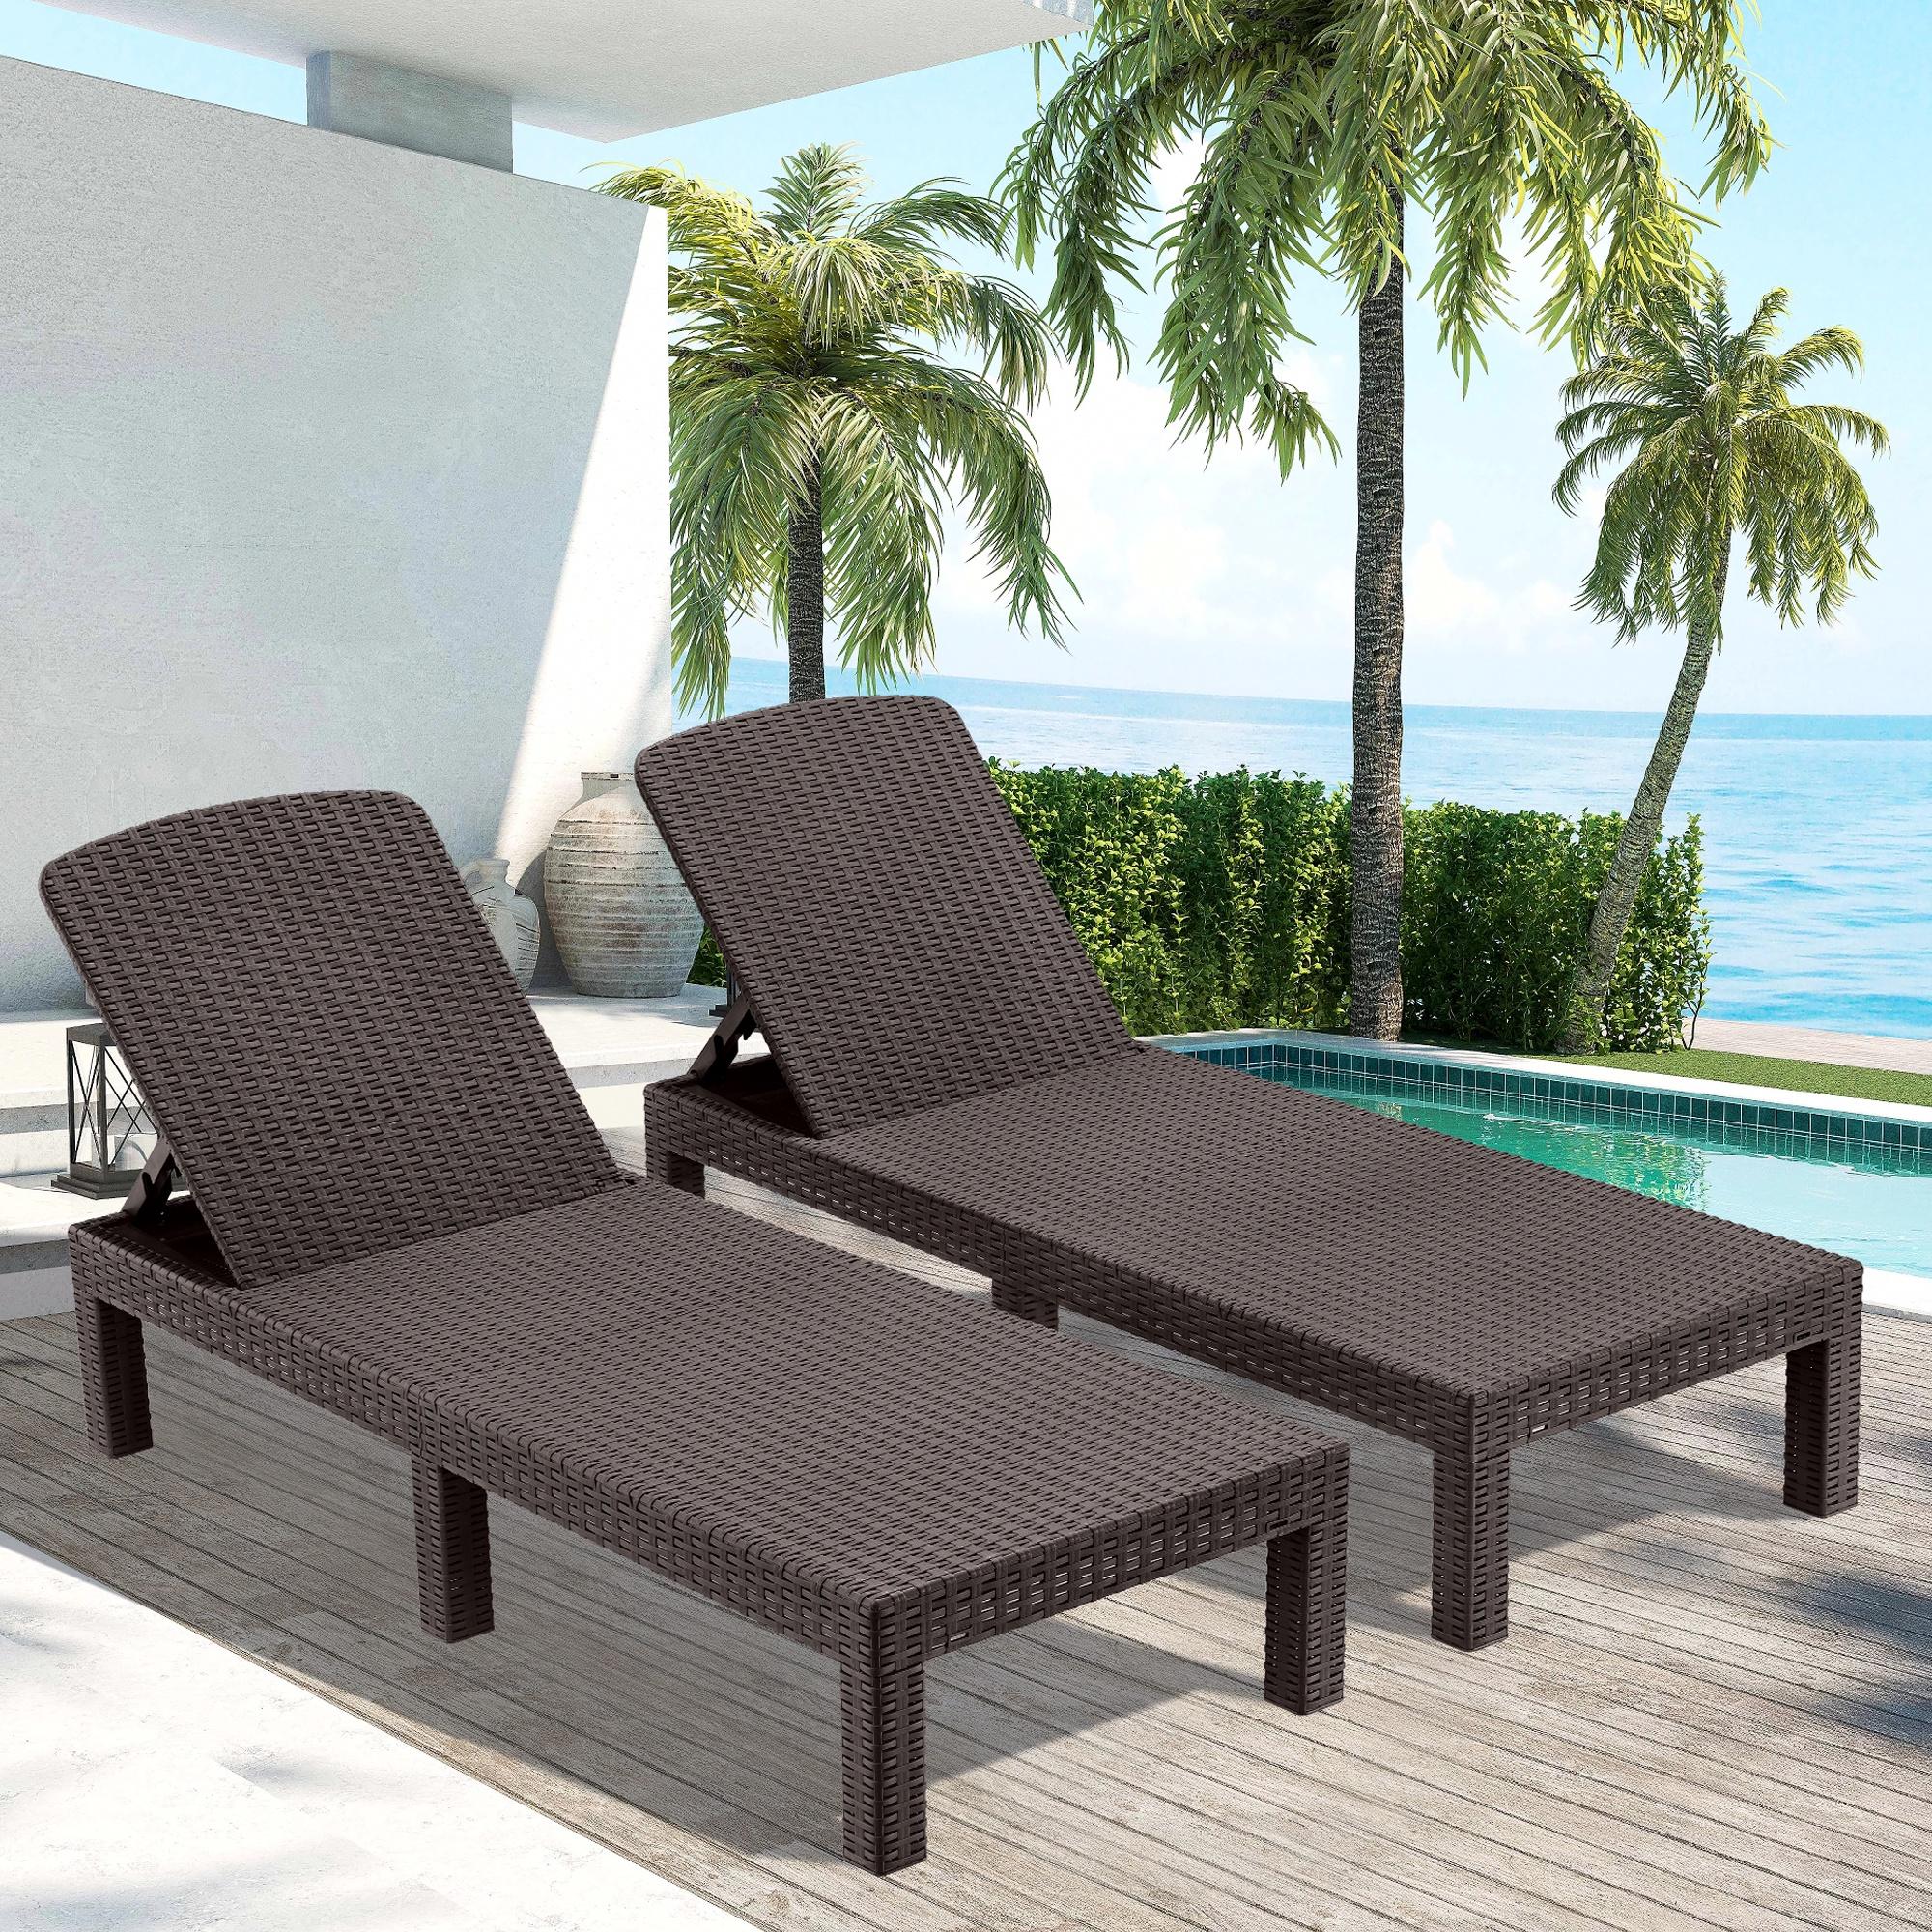 2 Piece Outdoor Chaise Lounge Set, PP Resin Adjustable Reclining Lounge Chairs, Patio Sun Loungers for Poolside Porch Backyard Garden, Espresso - image 2 of 10